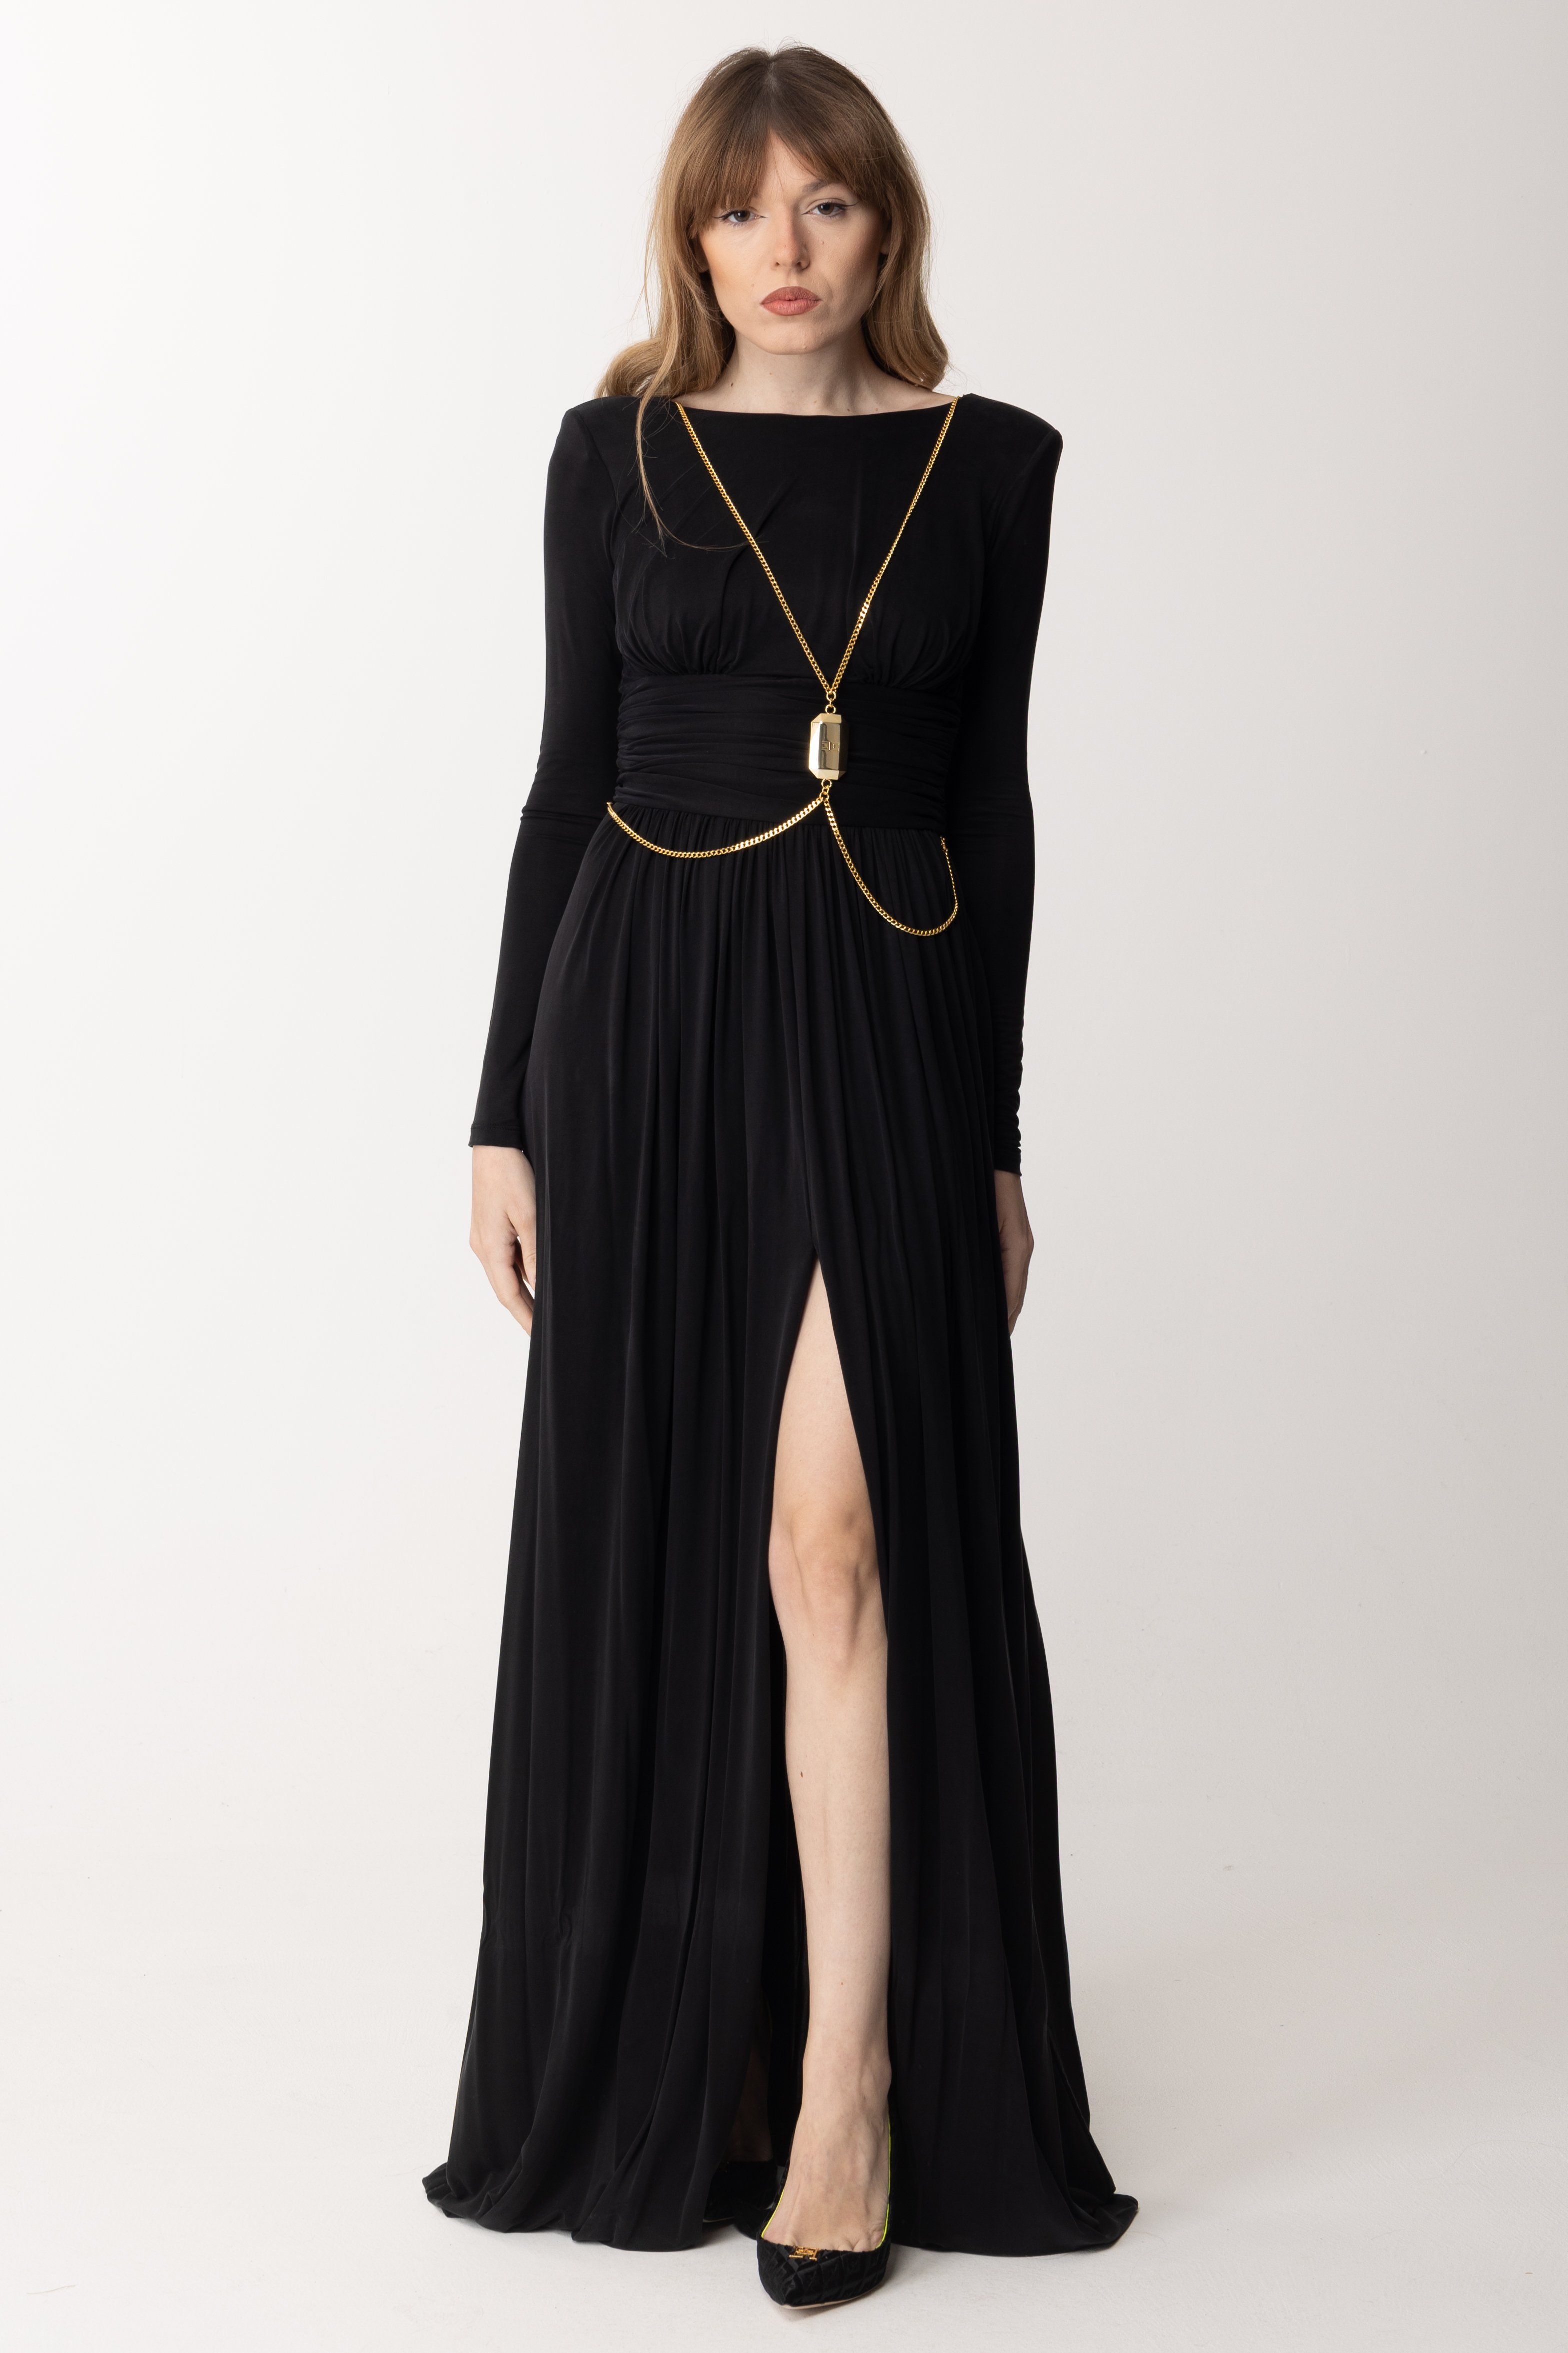 Preview: Elisabetta Franchi Red carpet dress with jewel Nero